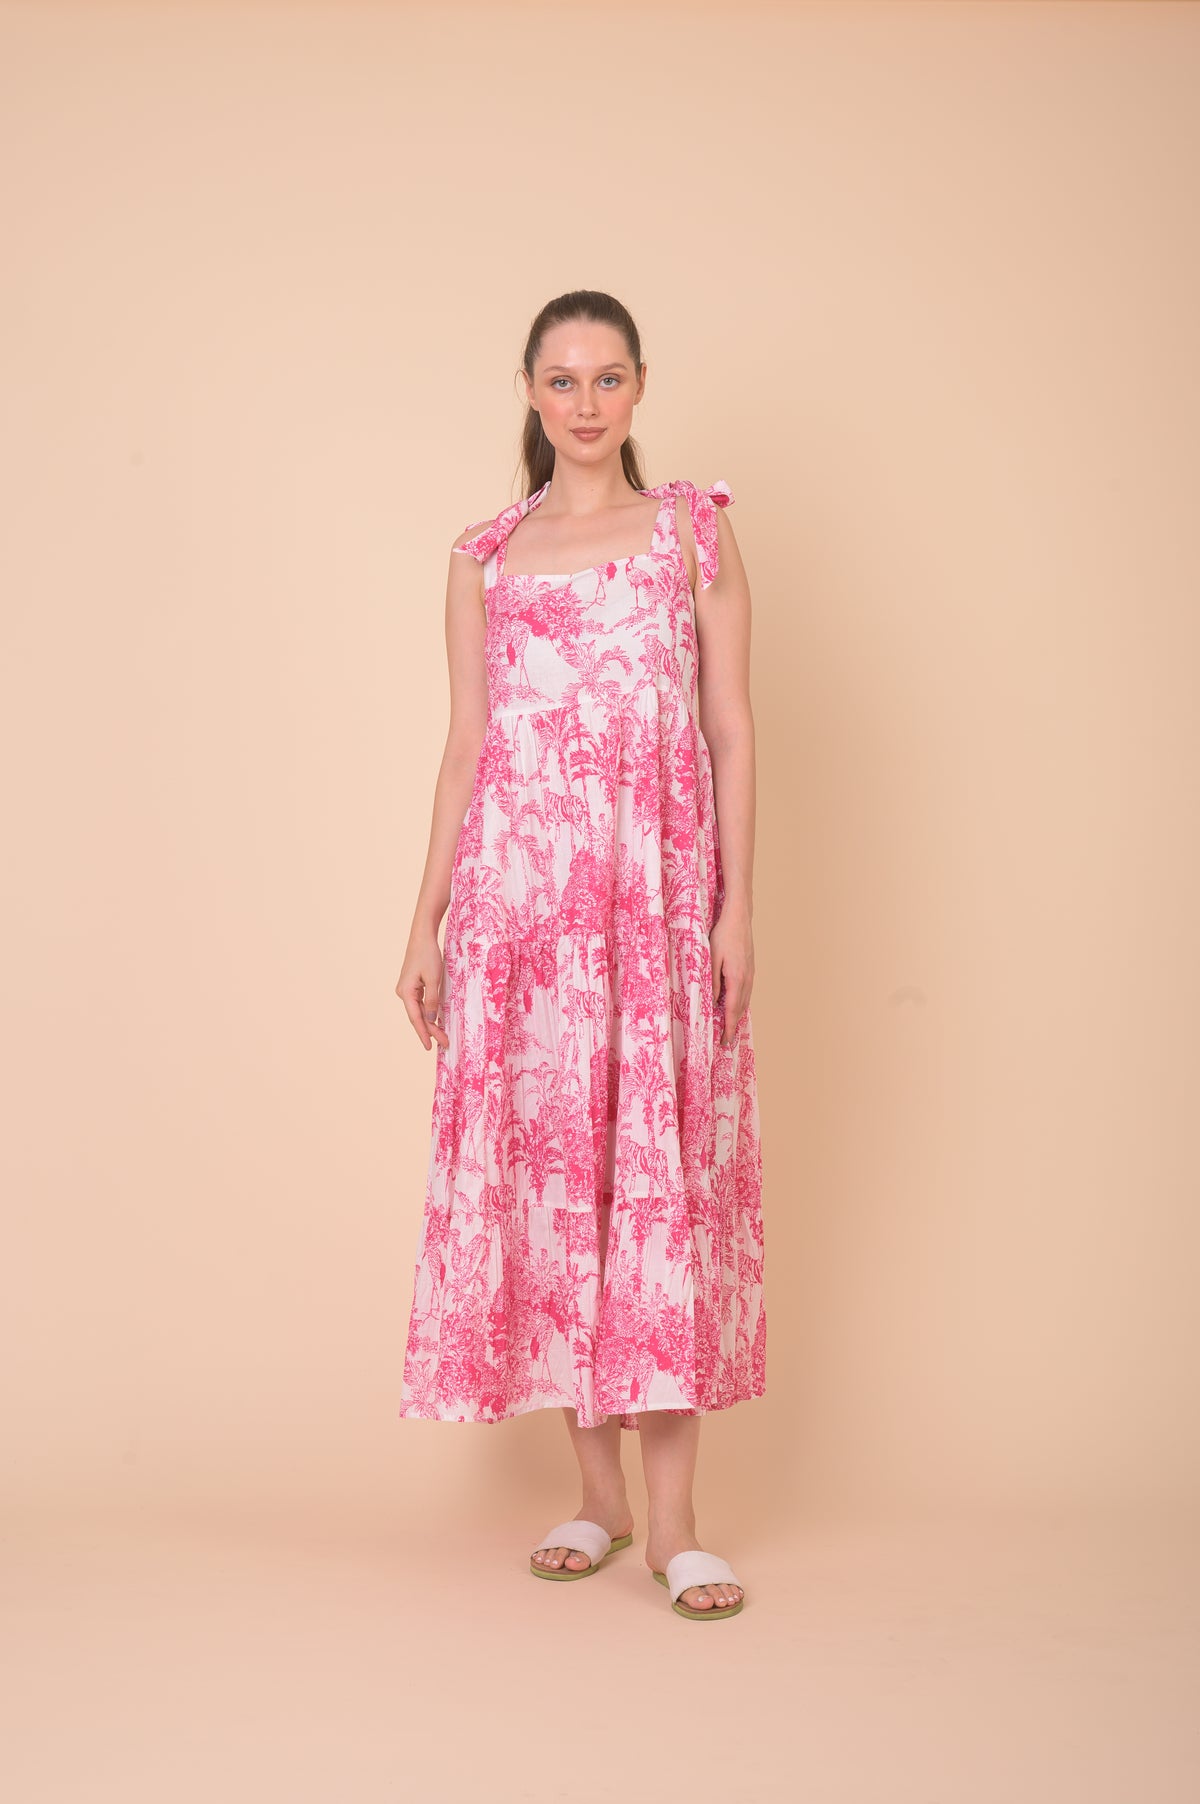 White and pink cotton maxi dress with tie shoulders with stalk and tree print